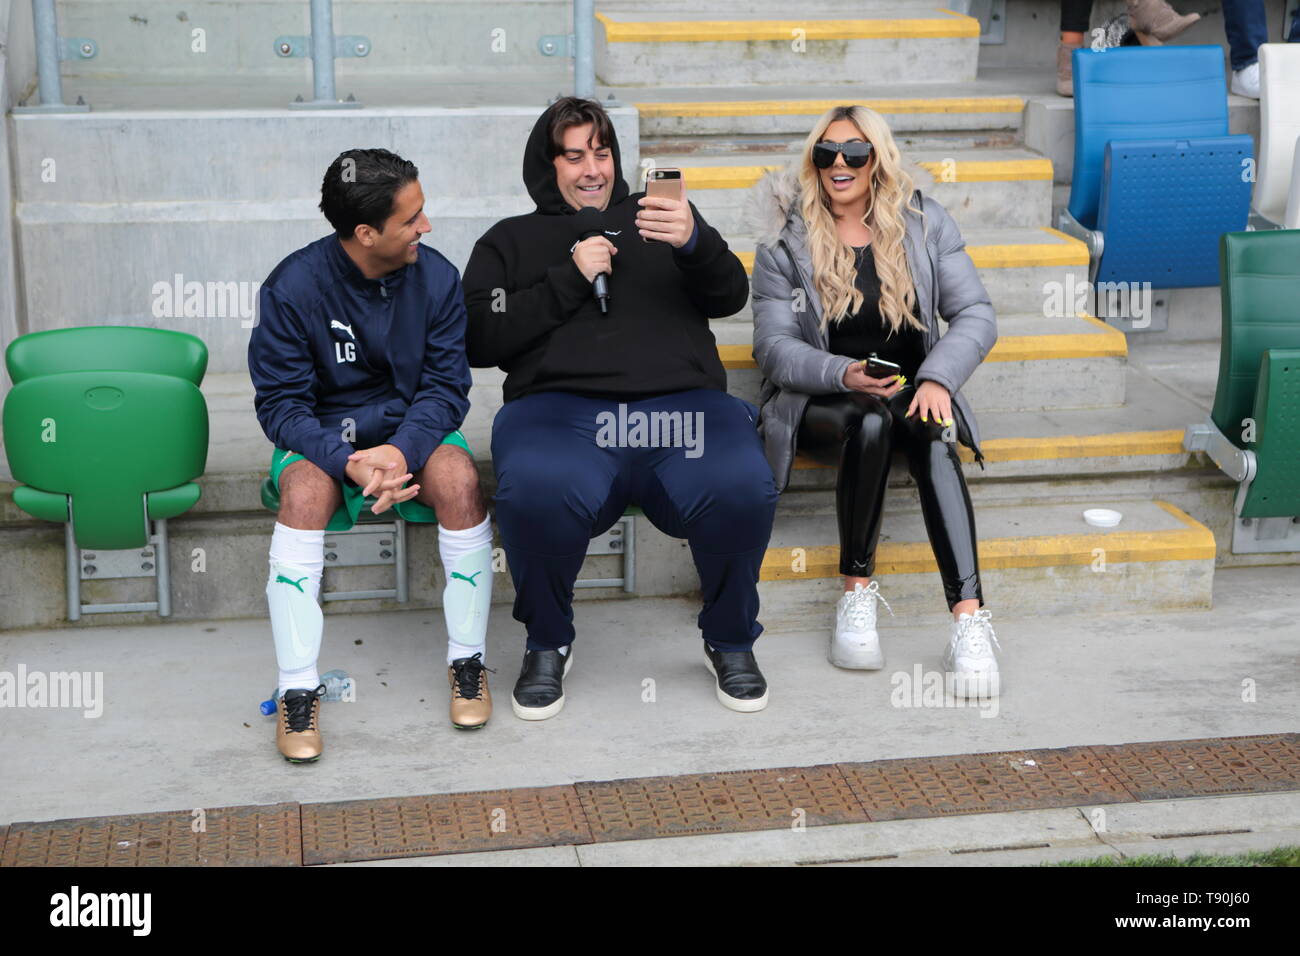 Calum Best ’My Tribute’ charity to father George football match  Featuring: Liam Blackwell, Gatsby, James Argent, Arg, Chloe Ferry Where: Belfast, Northern Ireland, United Kingdom When: 14 Apr 2019 Credit: WENN.com Stock Photo